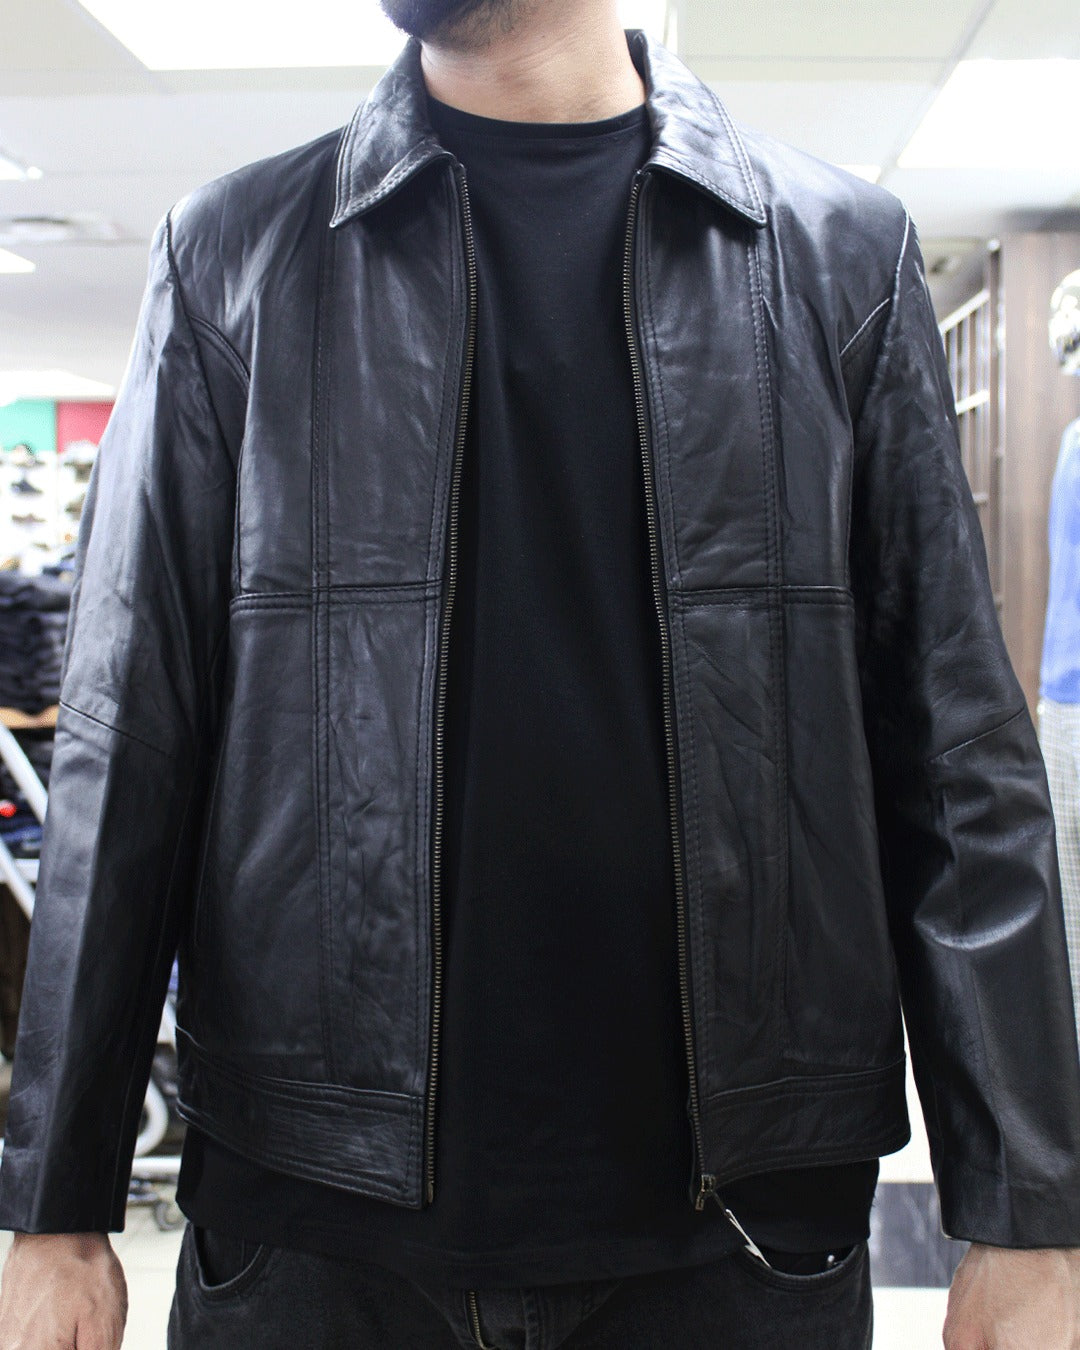 Men's Leather Jackets and Coats